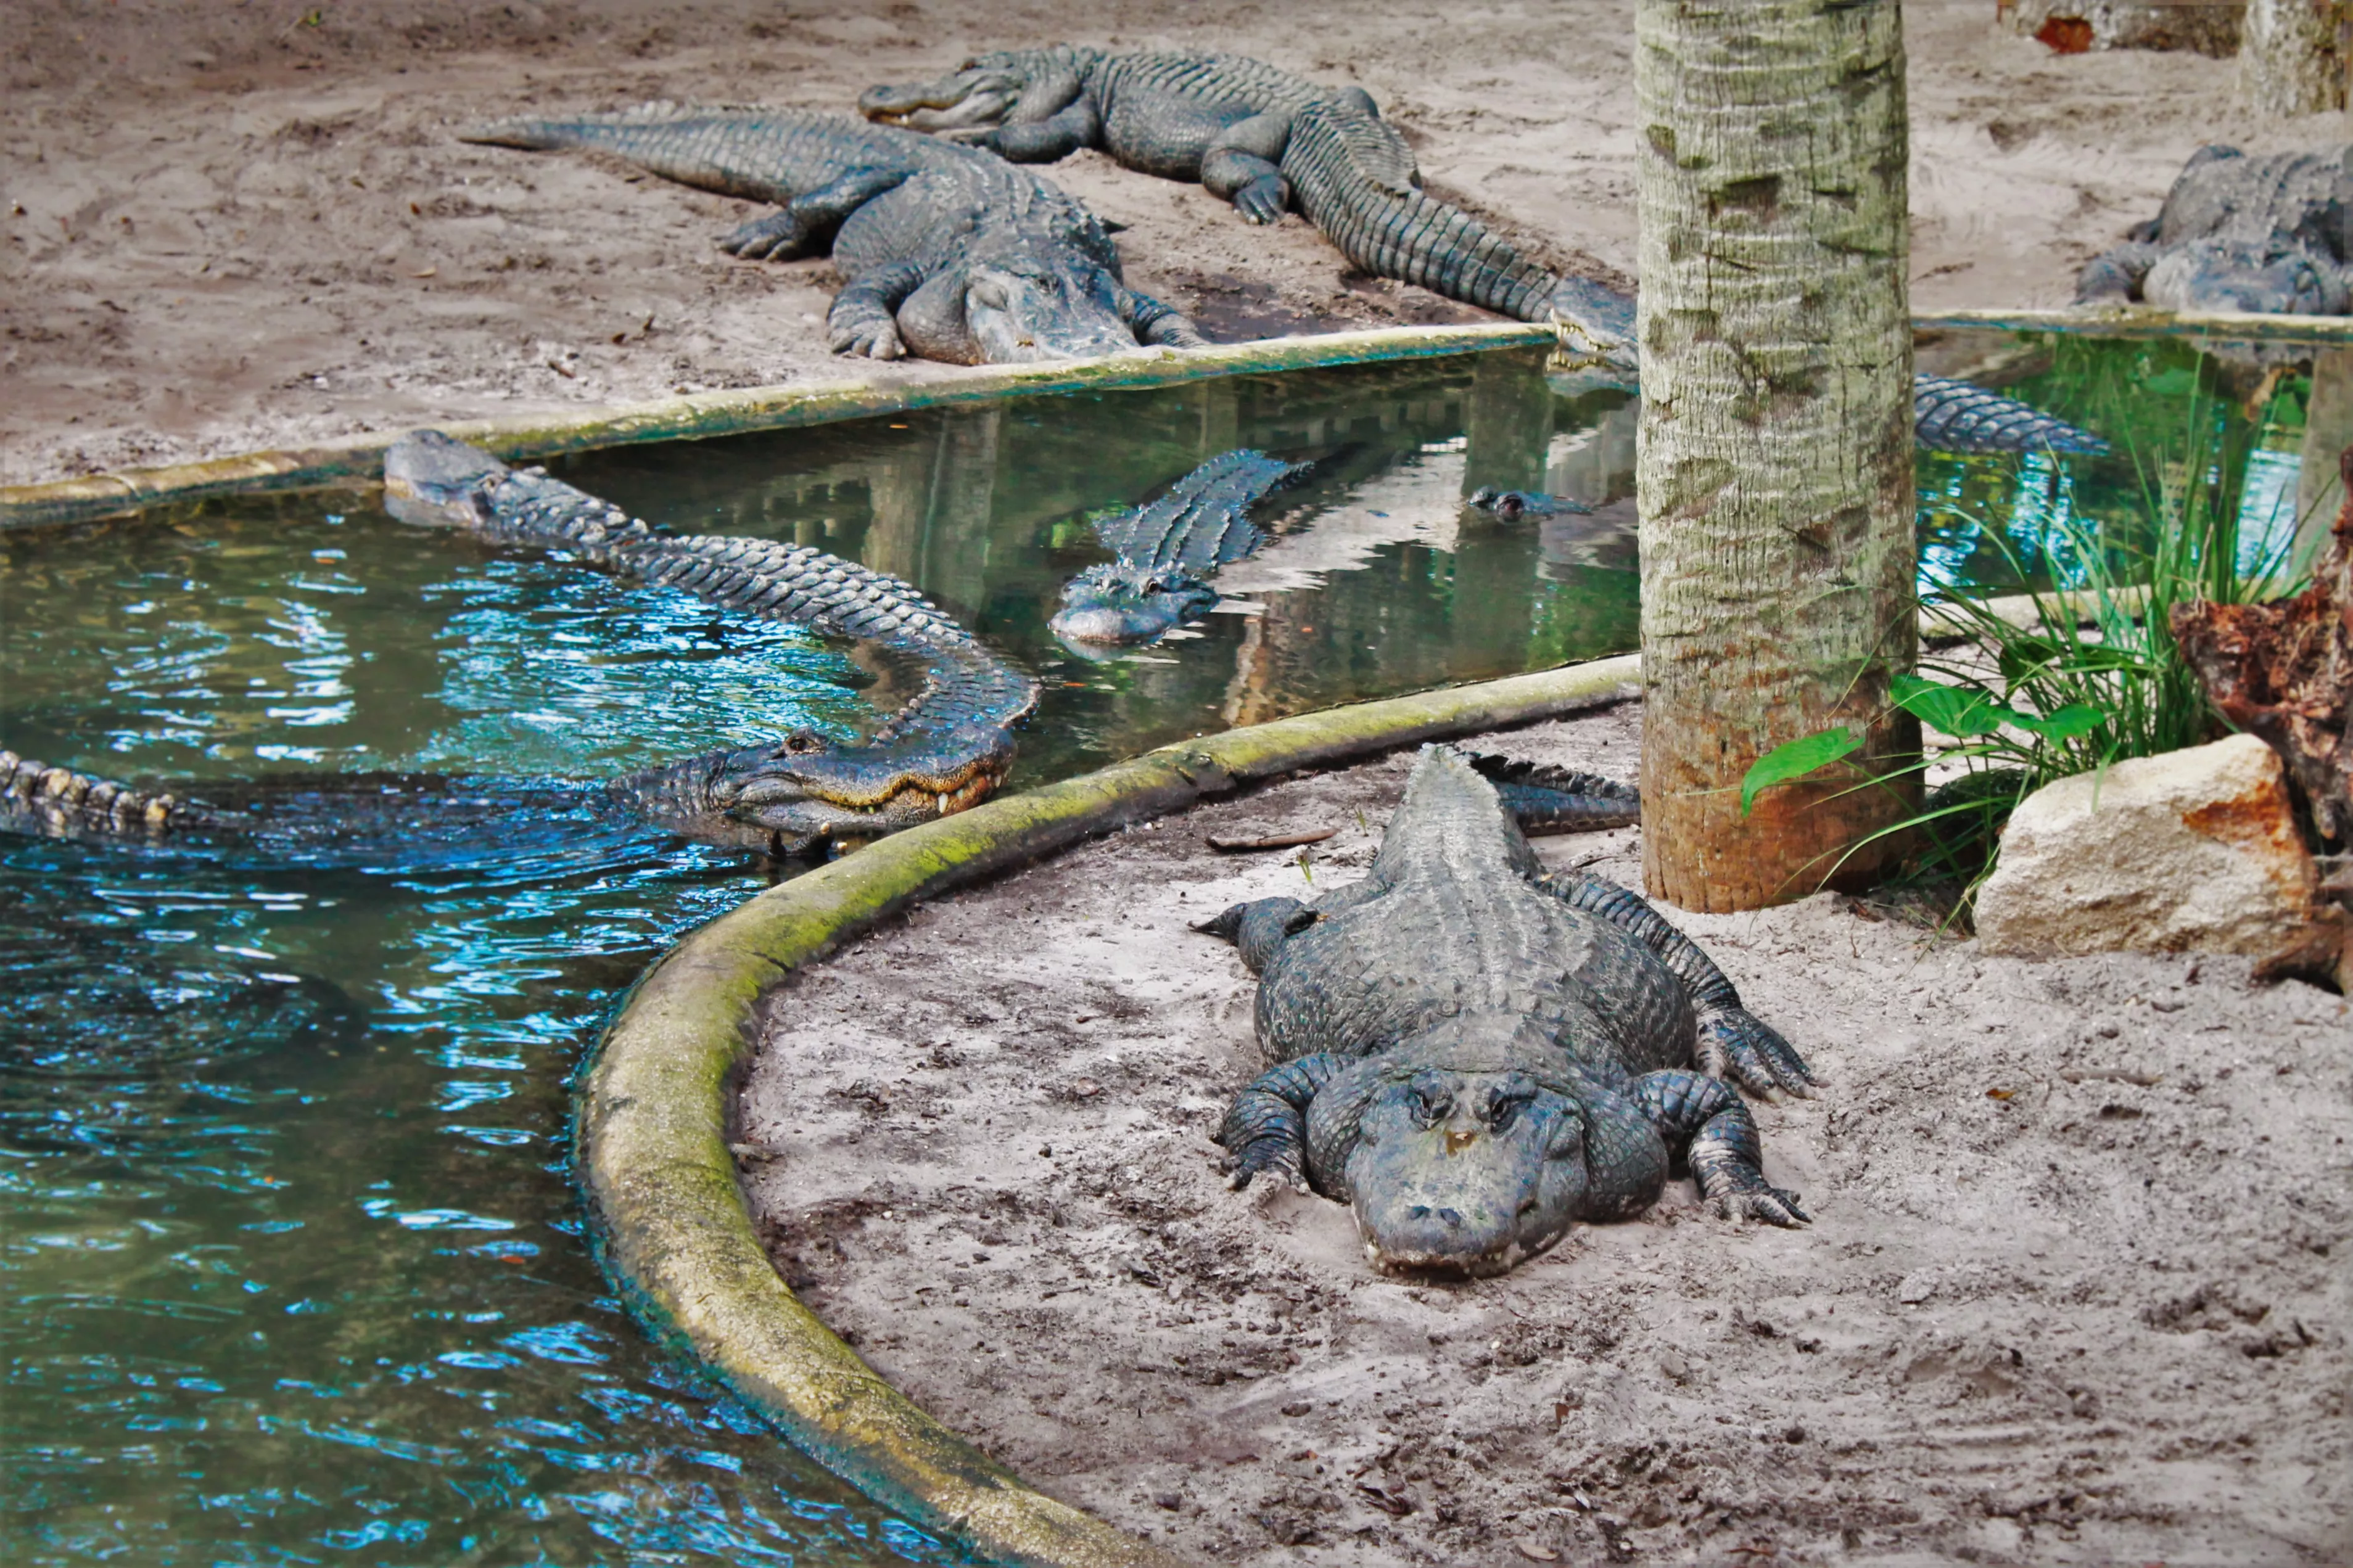 St. Augustine Alligator Farm in USA, North America | Zoos & Sanctuaries - Rated 4.3